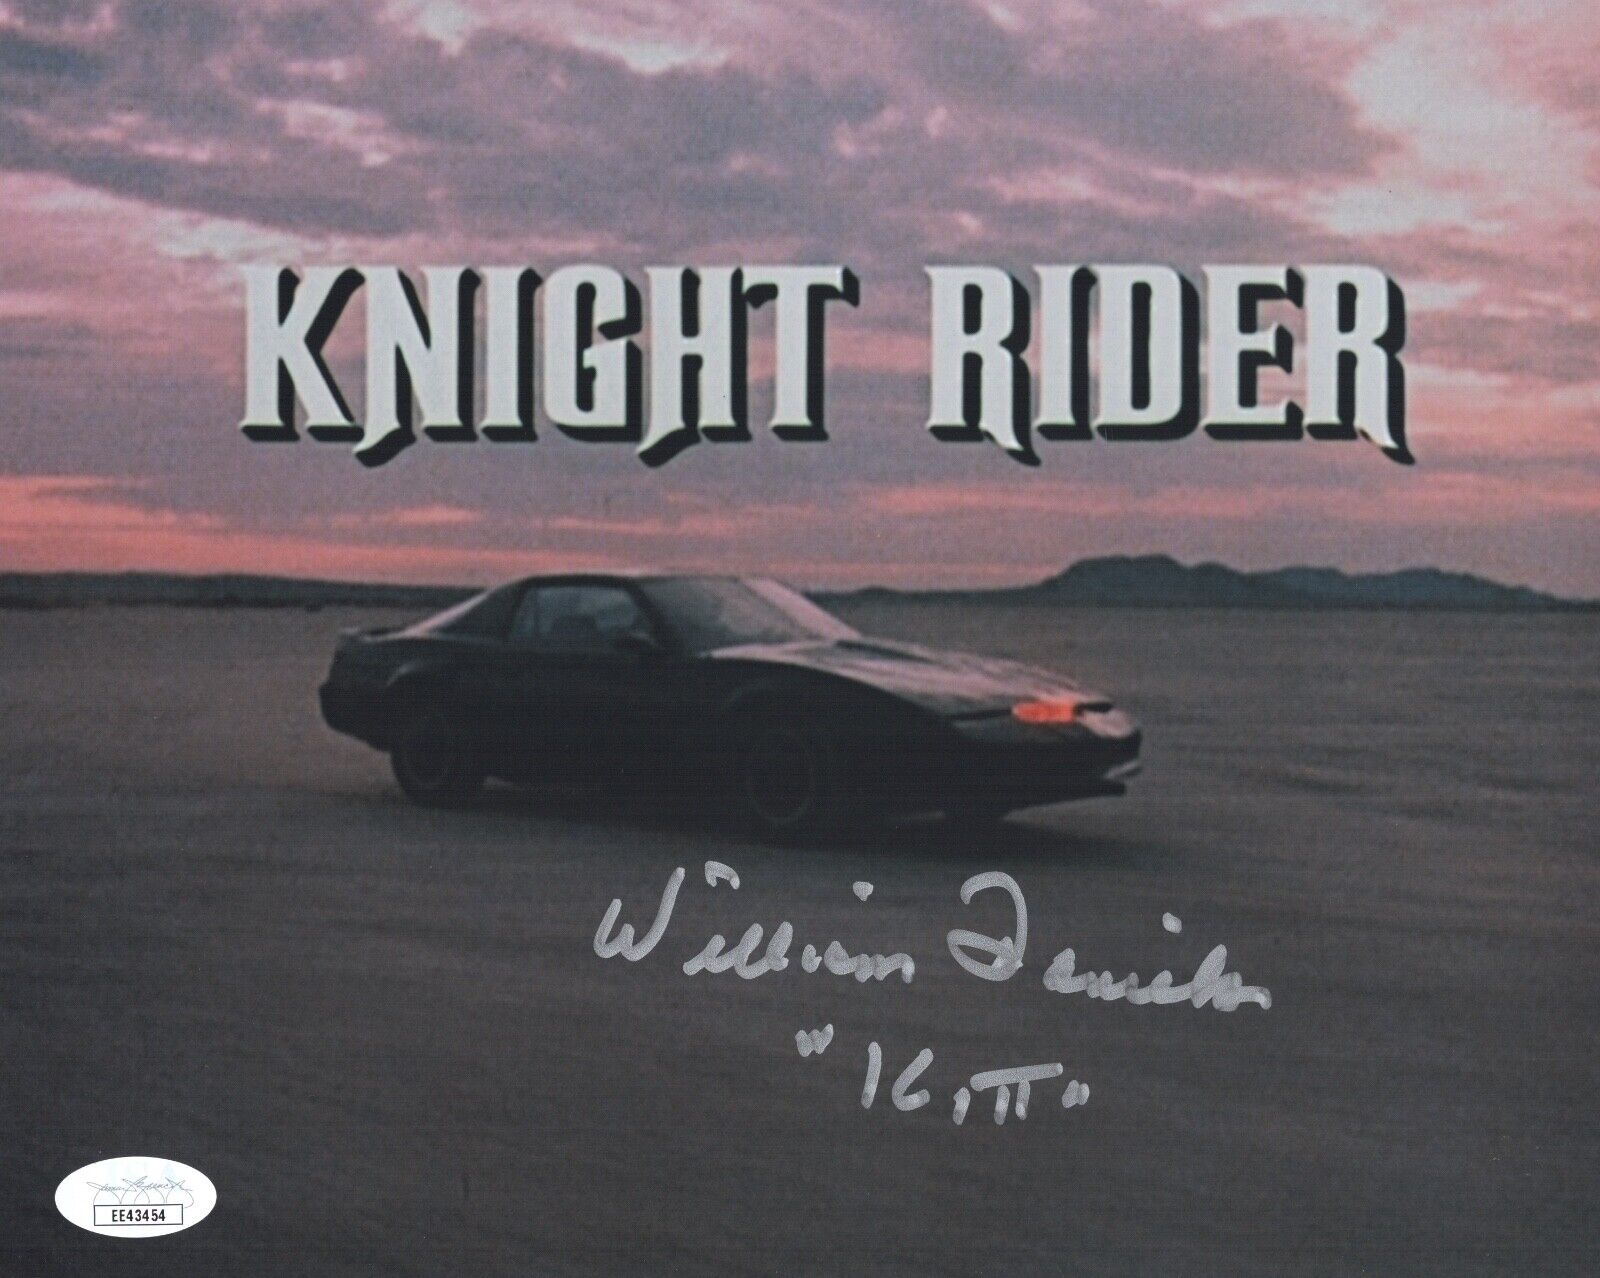 William Daniels Signed KITT Knight Rider 8x10 Photo Poster painting IN PERSON Autograph JSA COA